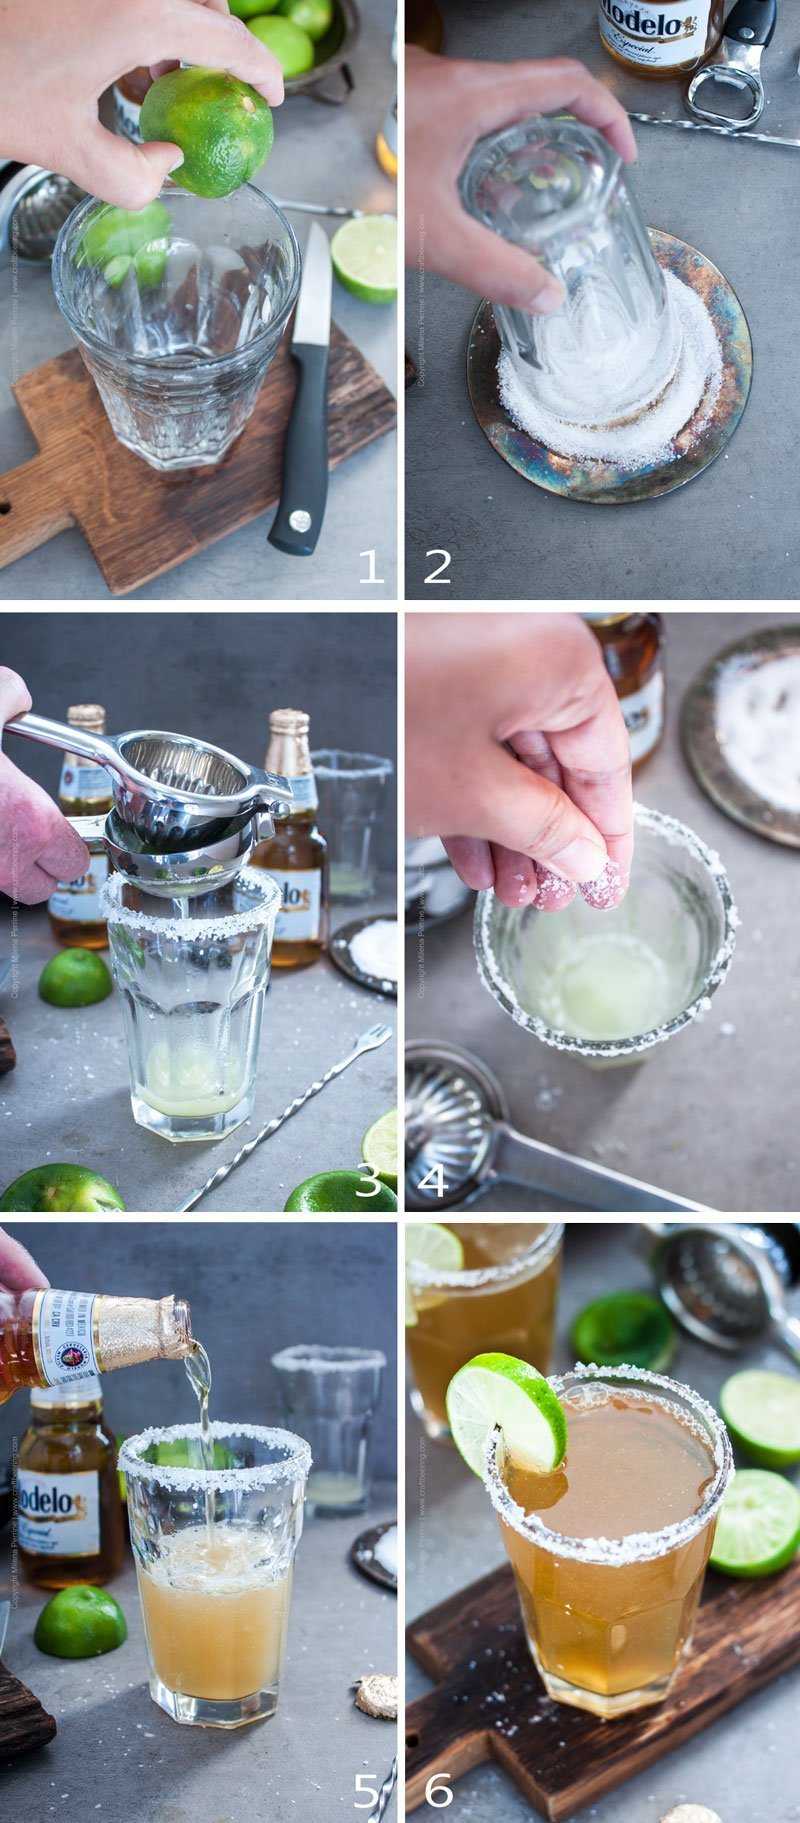 Step by step how to mix a Chelada beer.